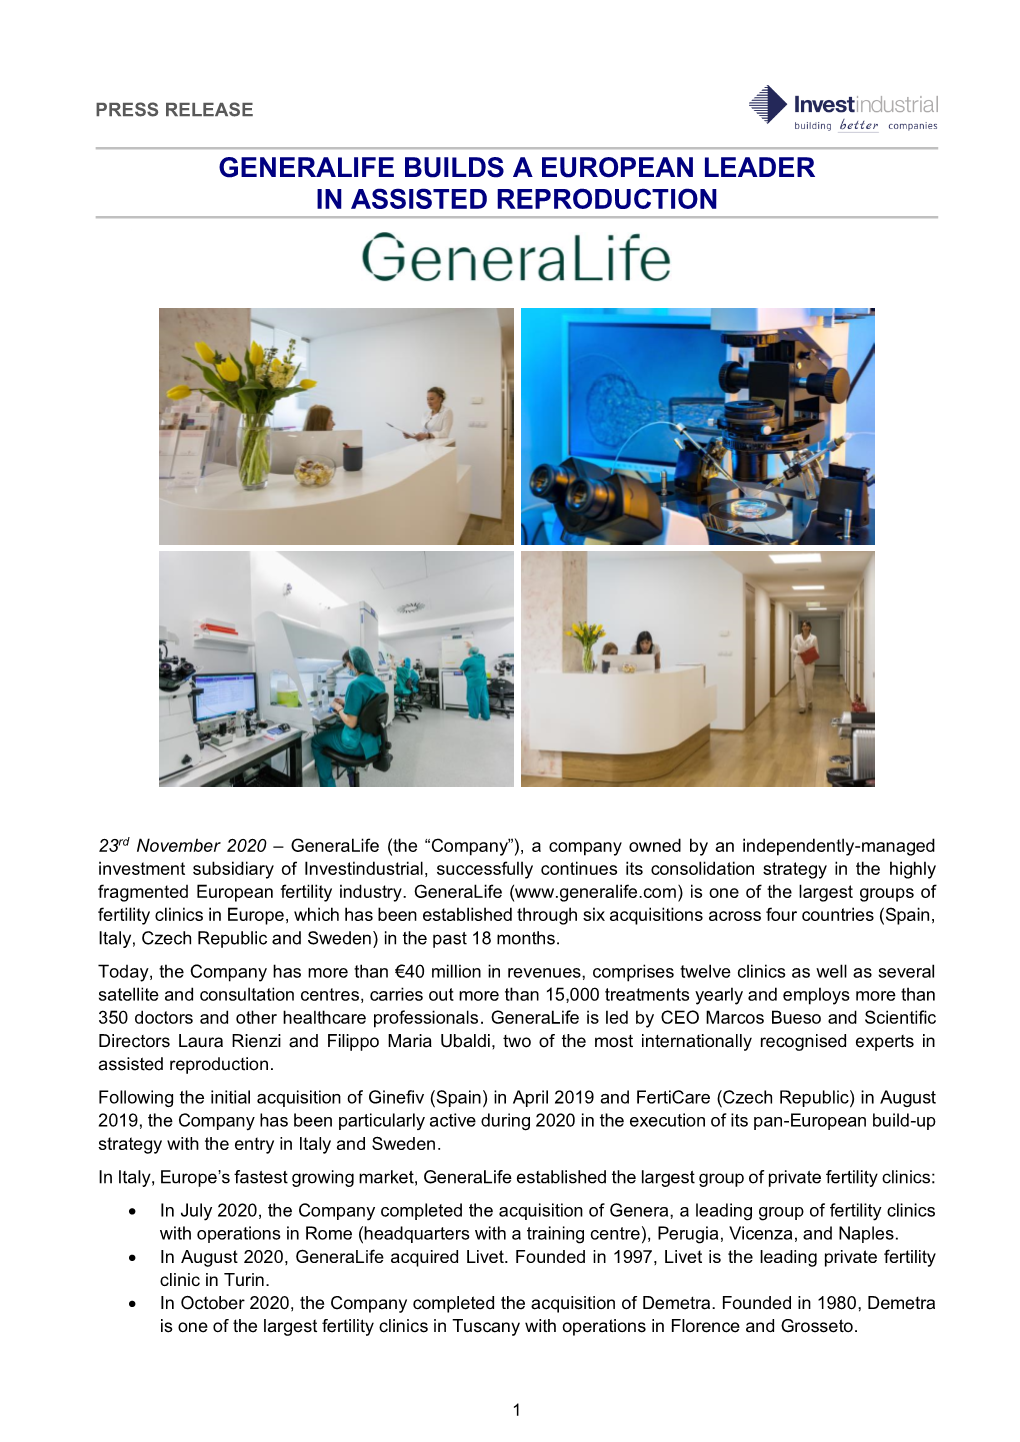 Generalife Builds a European Leader in Assisted Reproduction